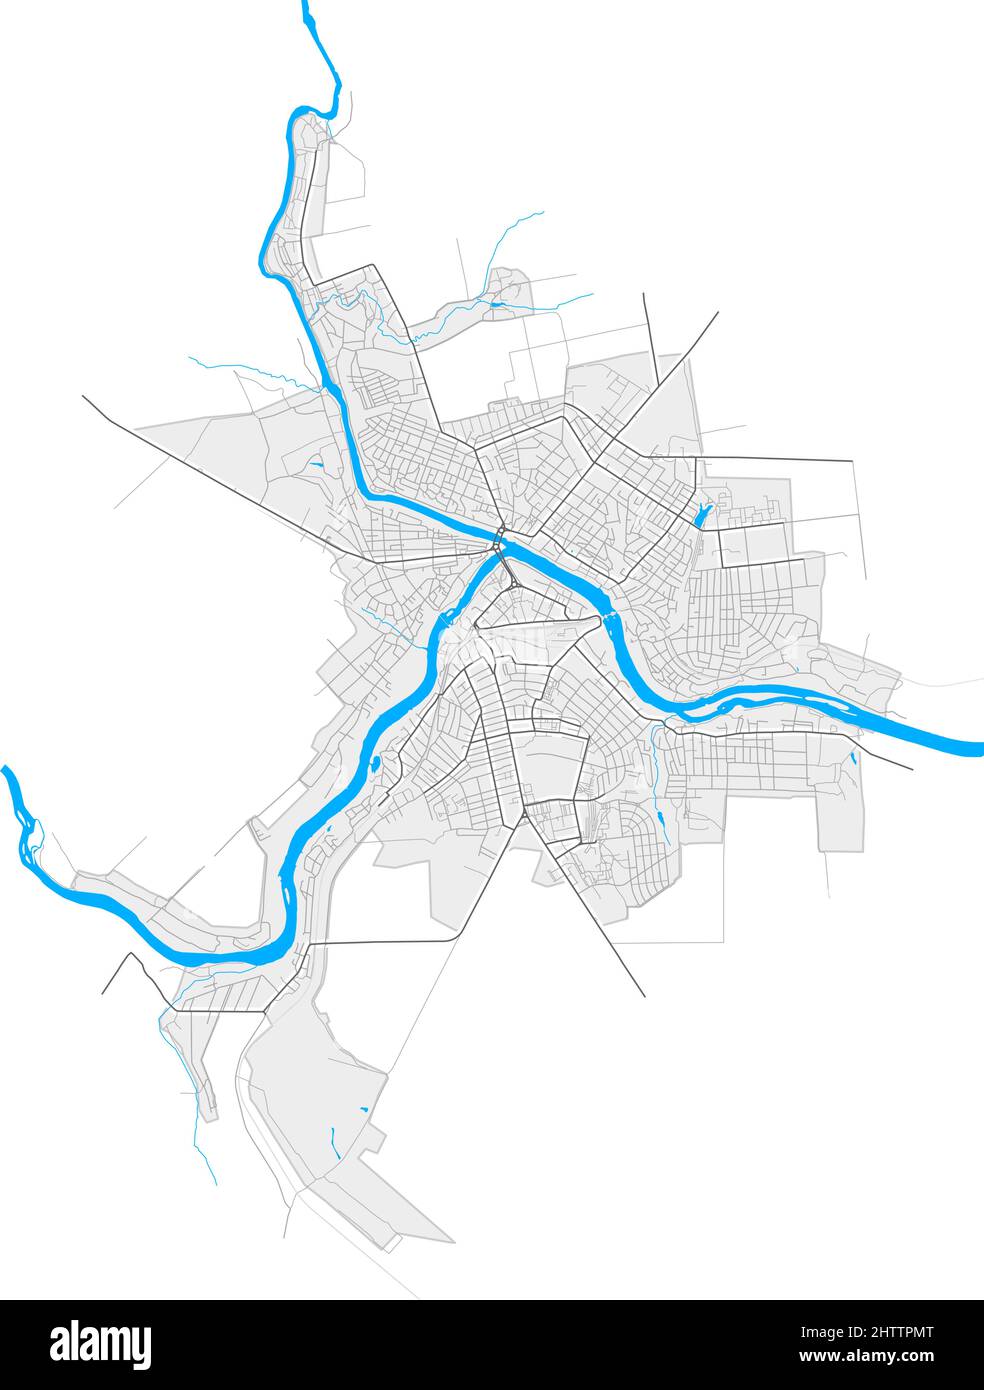 Pervomaisk, Mykolaiv Oblast, Ukraine high resolution vector map with city boundaries and outlined paths. White additional outlines for main roads. Man Stock Vector